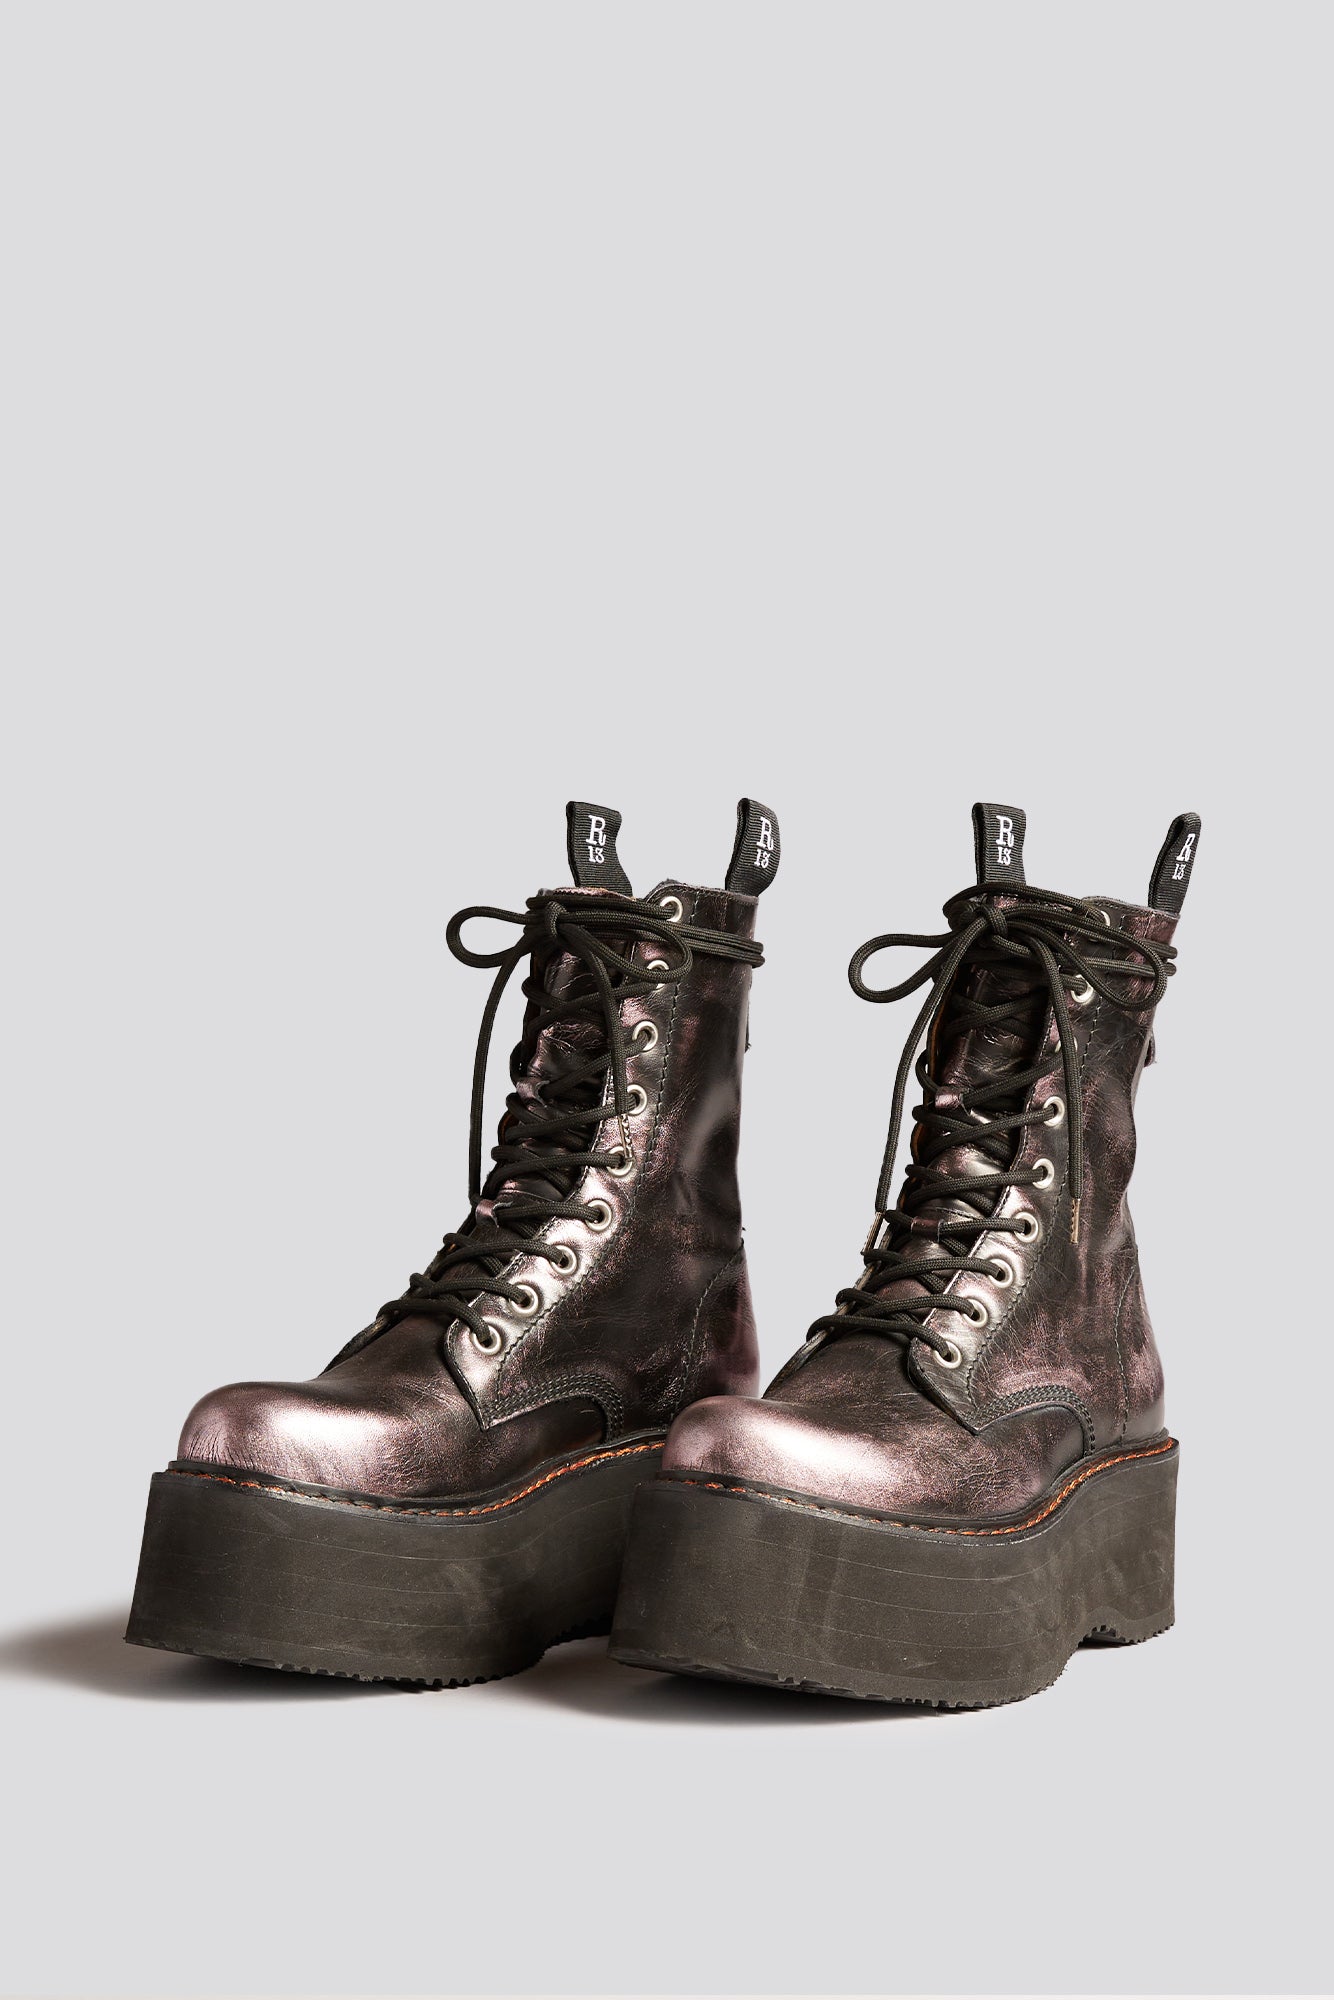 DOUBLE STACK BOOT - PINK SHINE